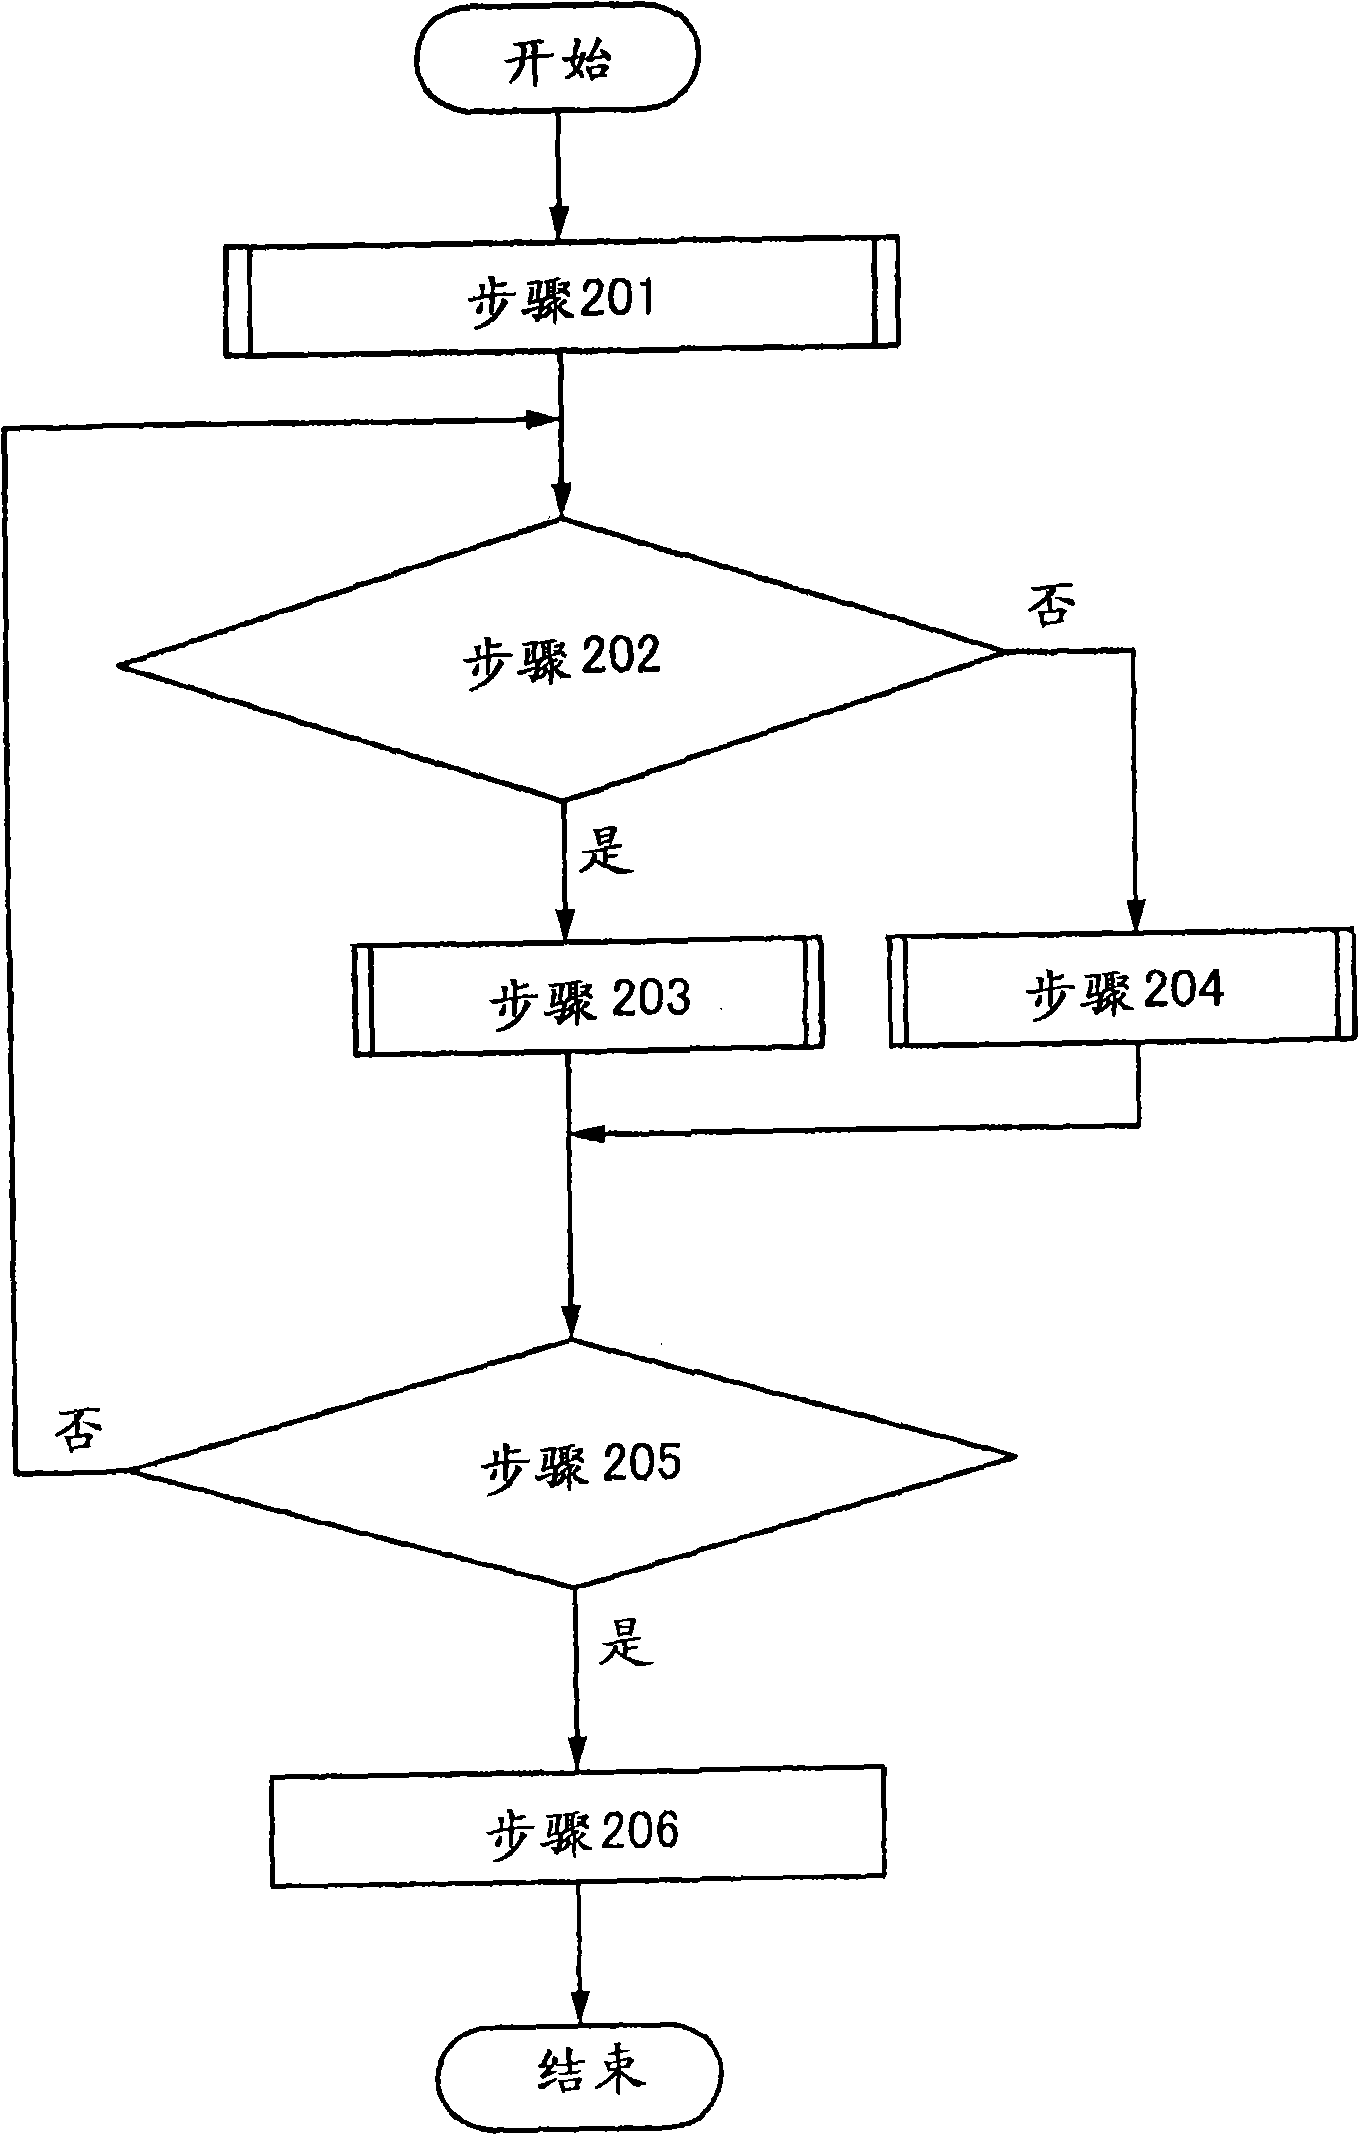 Image processing method, image processing system and computer program